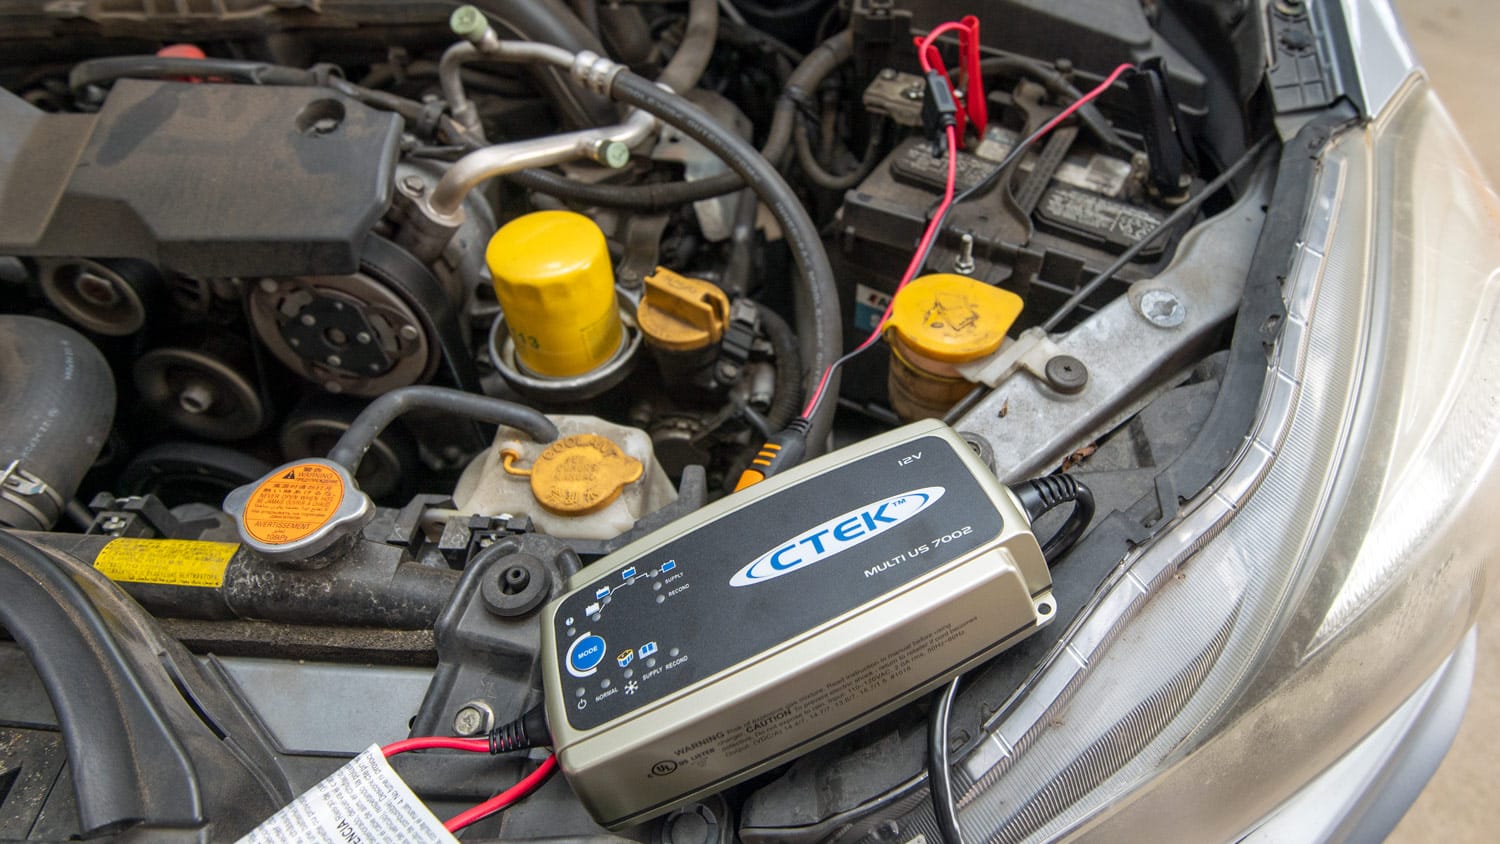 The CTEK car battery charger attached to a vehicle battery.